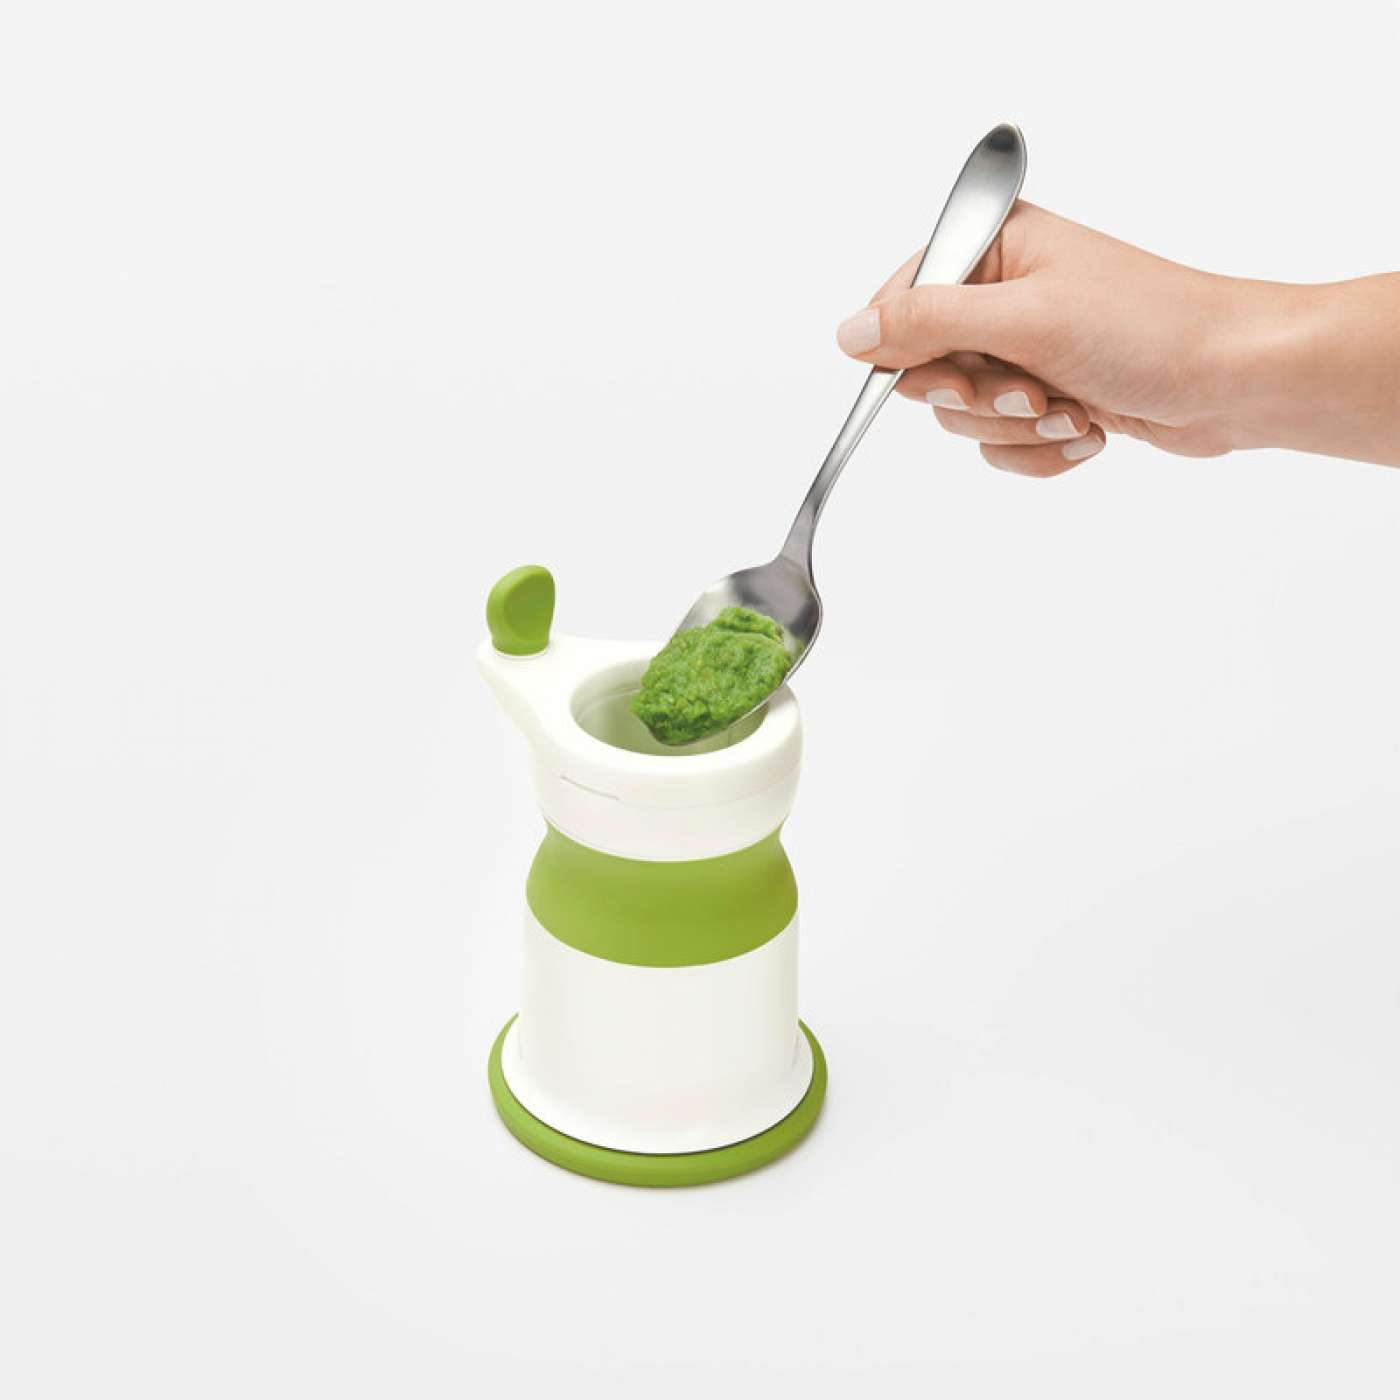 Say Goodbye to Messy Grape Cutting: OXO tot Grape Cutter Review